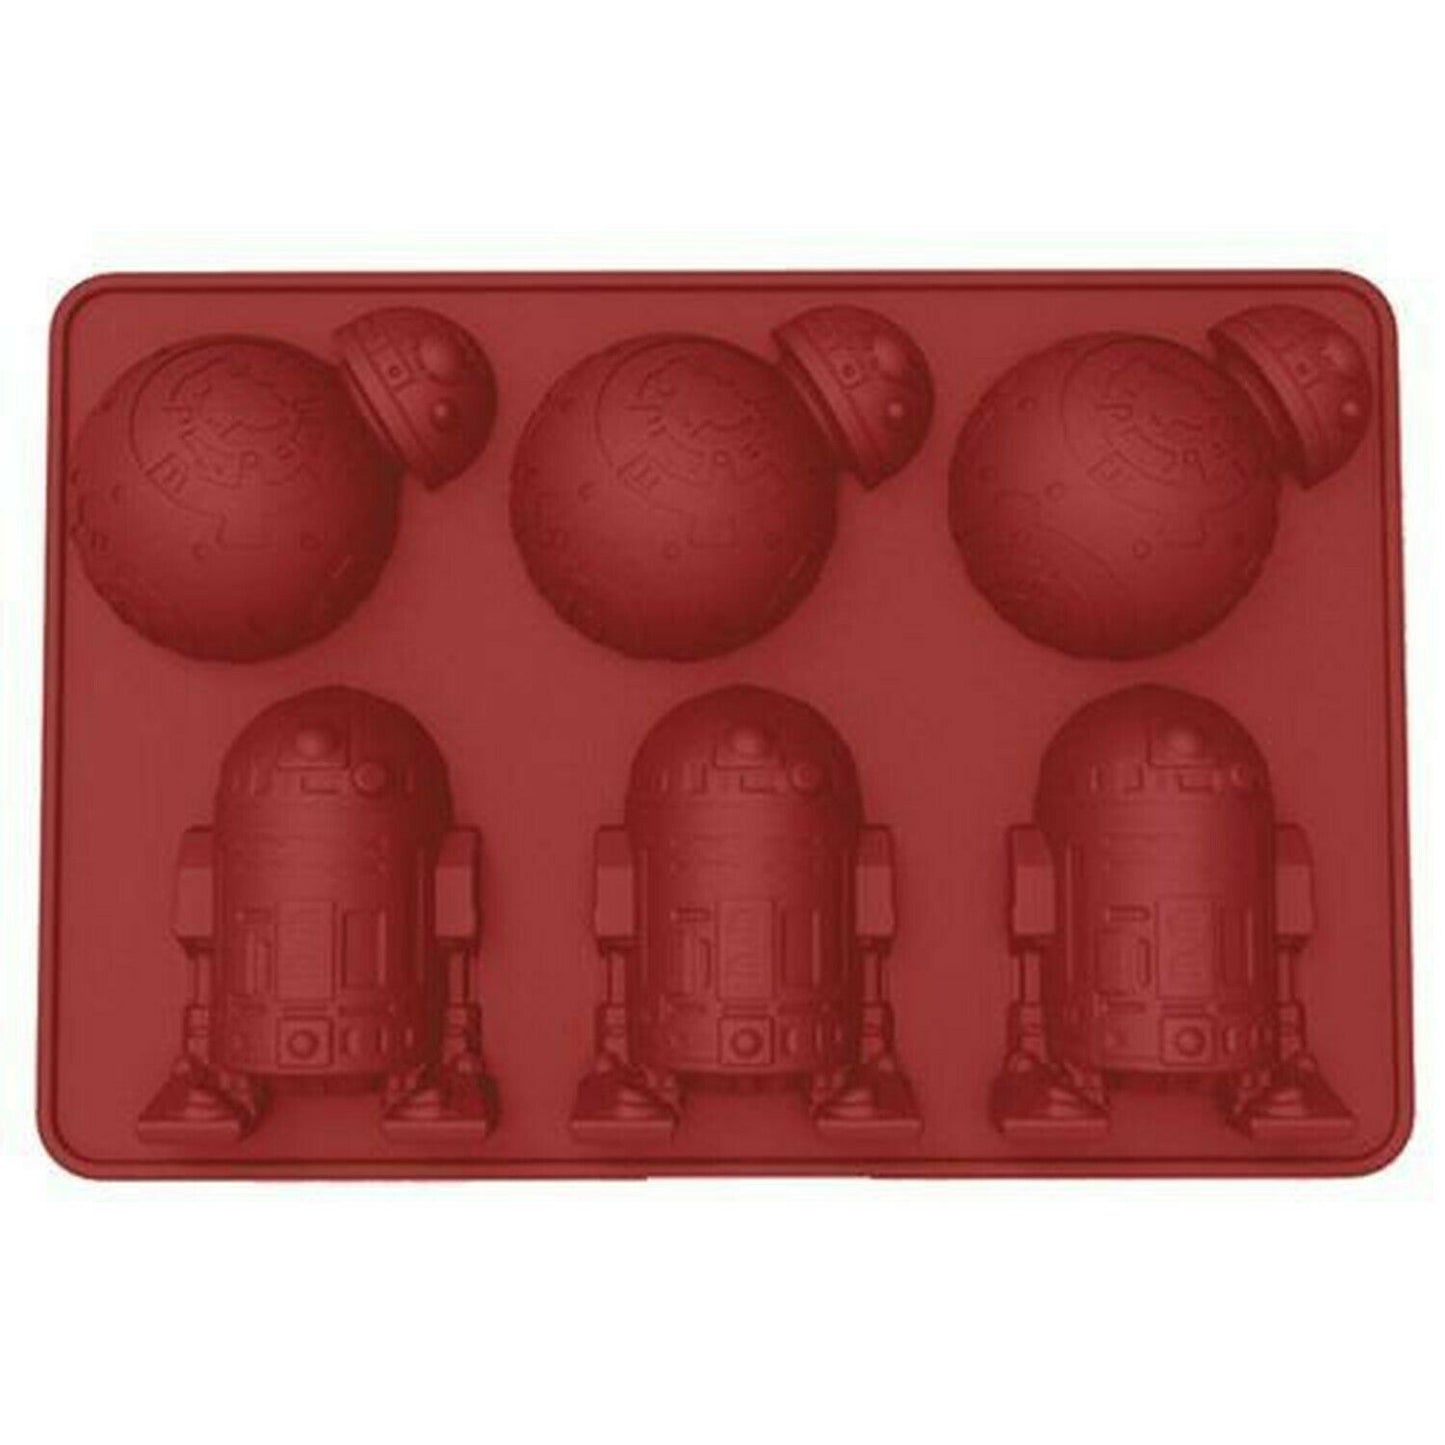 Star Wars R2-D2 Silicone Ice Cube Tray - Entertainment Earth